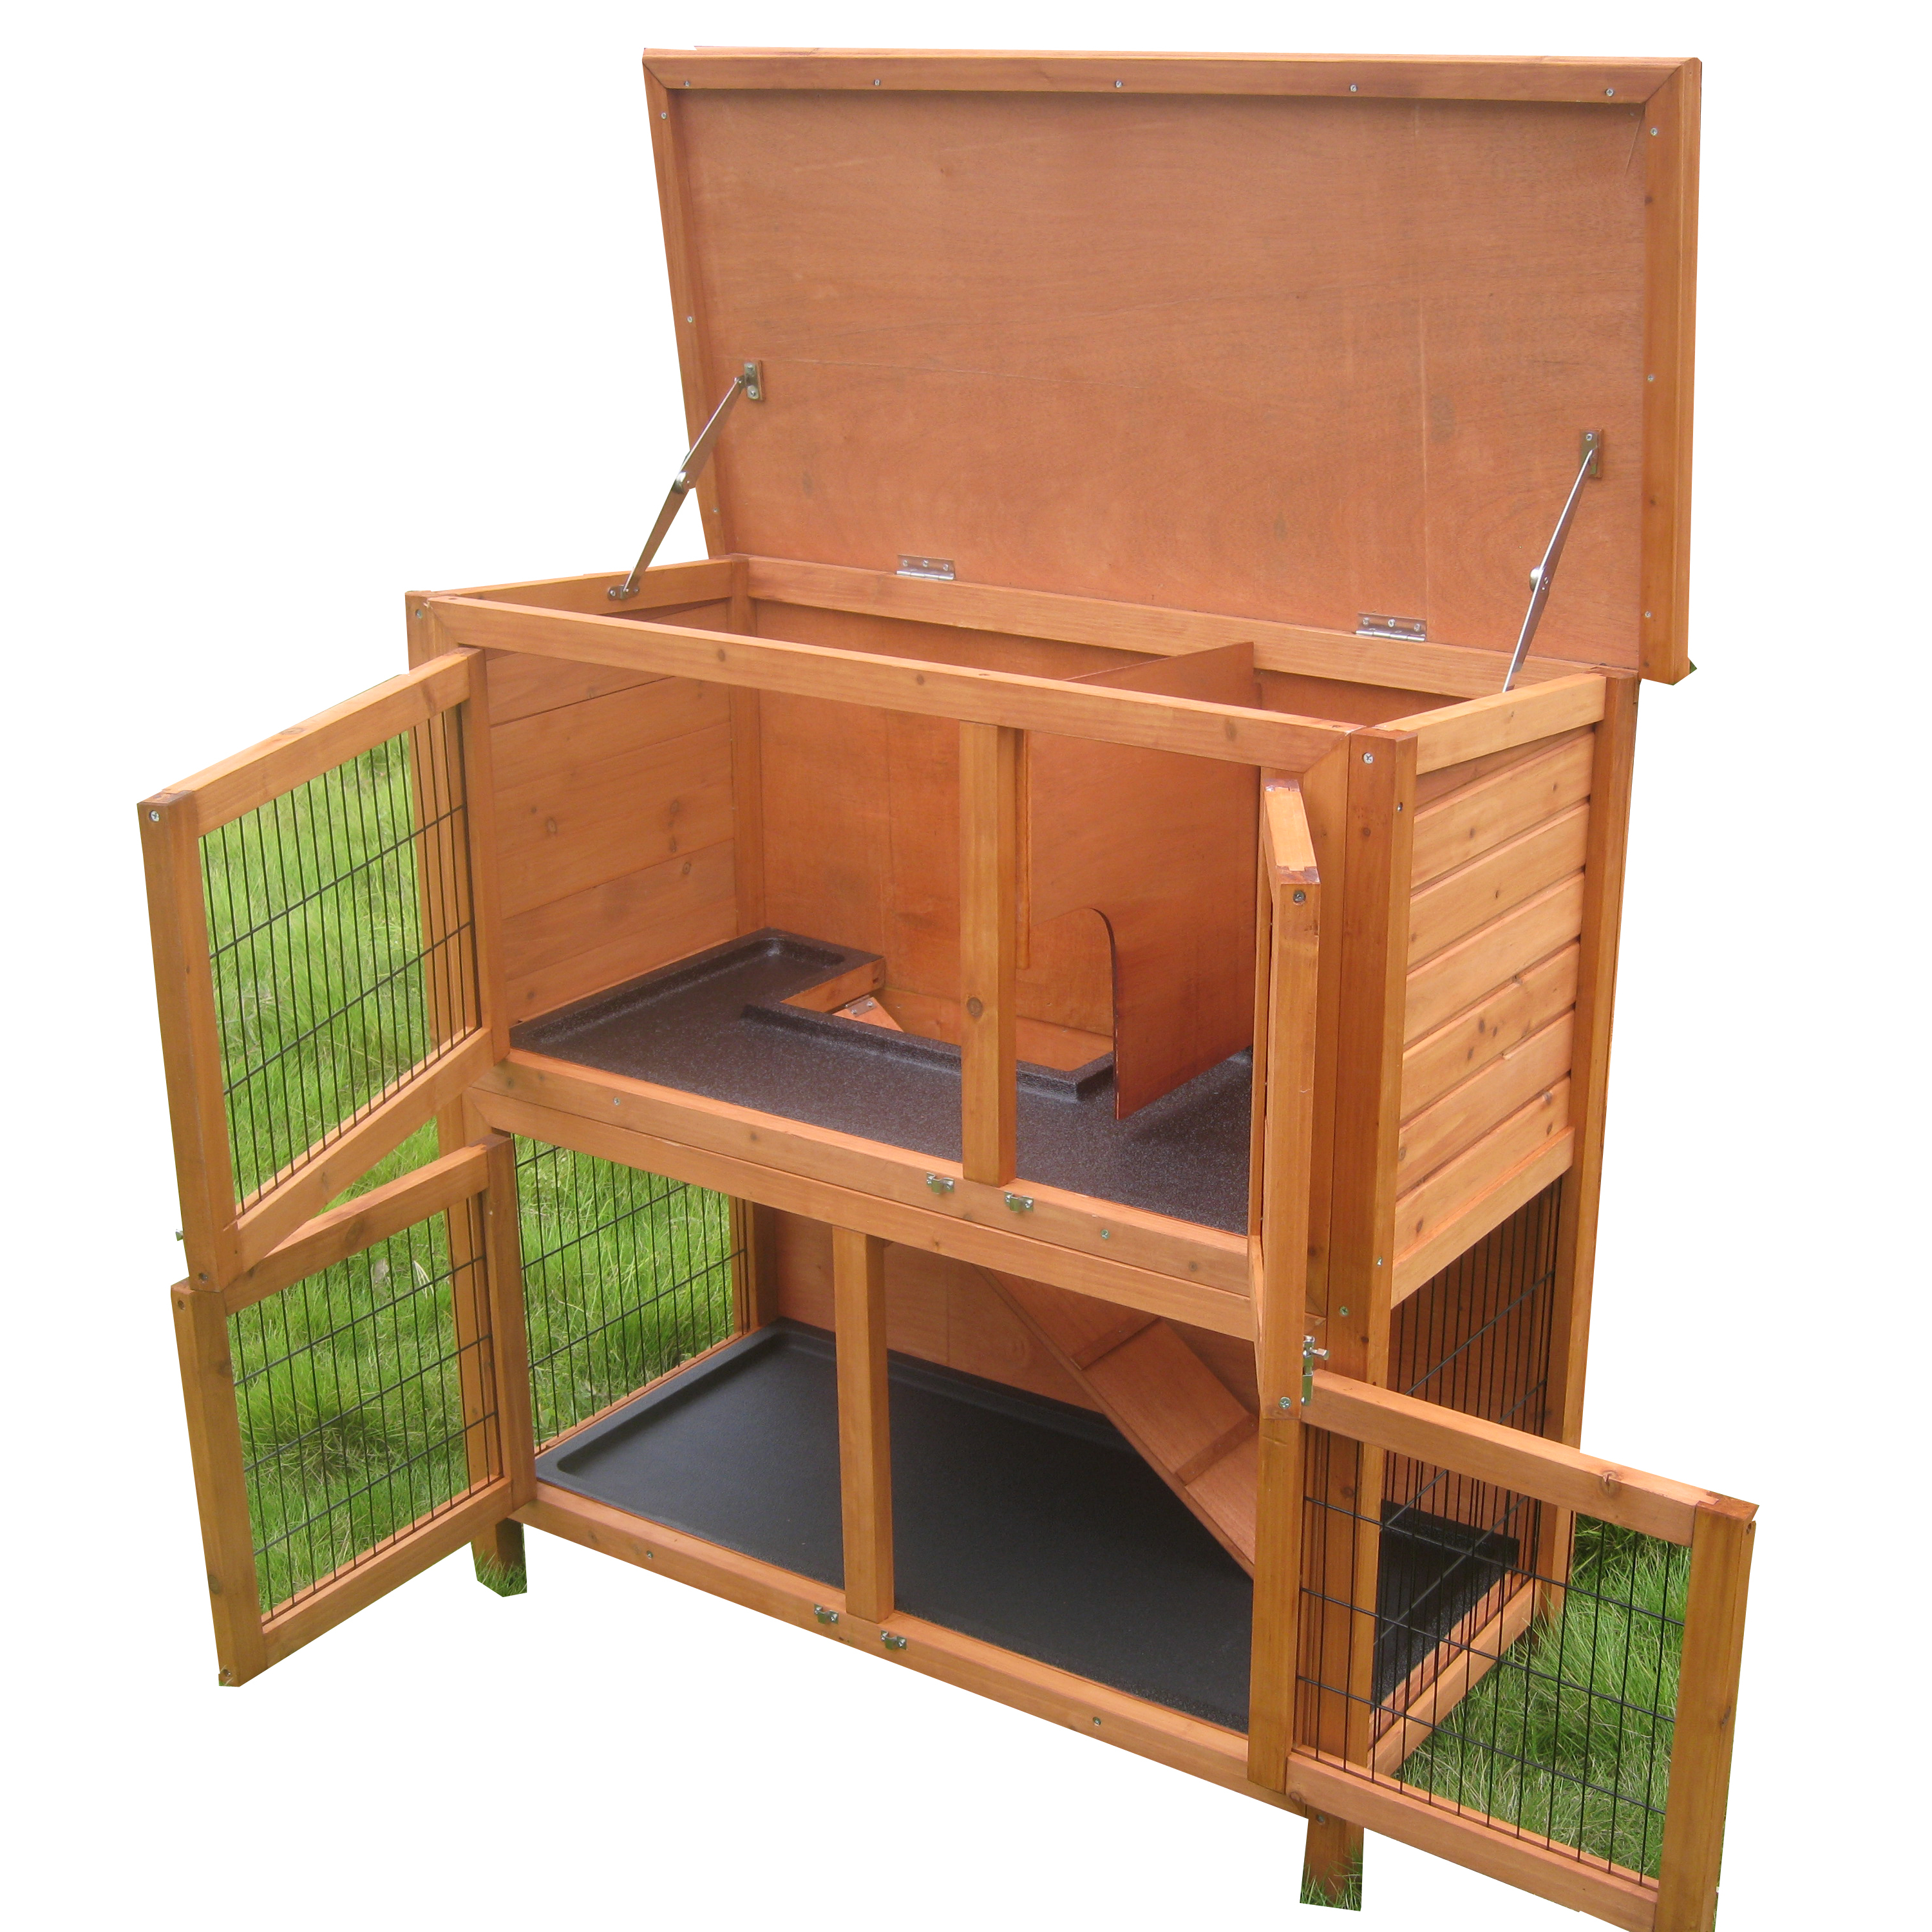 Popular Design for Wood Cubby House -
 Cheap Outdoor Garden Backyard commercial Large two storey Wood Industrial Habitats ferret Guinea Pig Bunny Cages Rabbit hutch – Easy